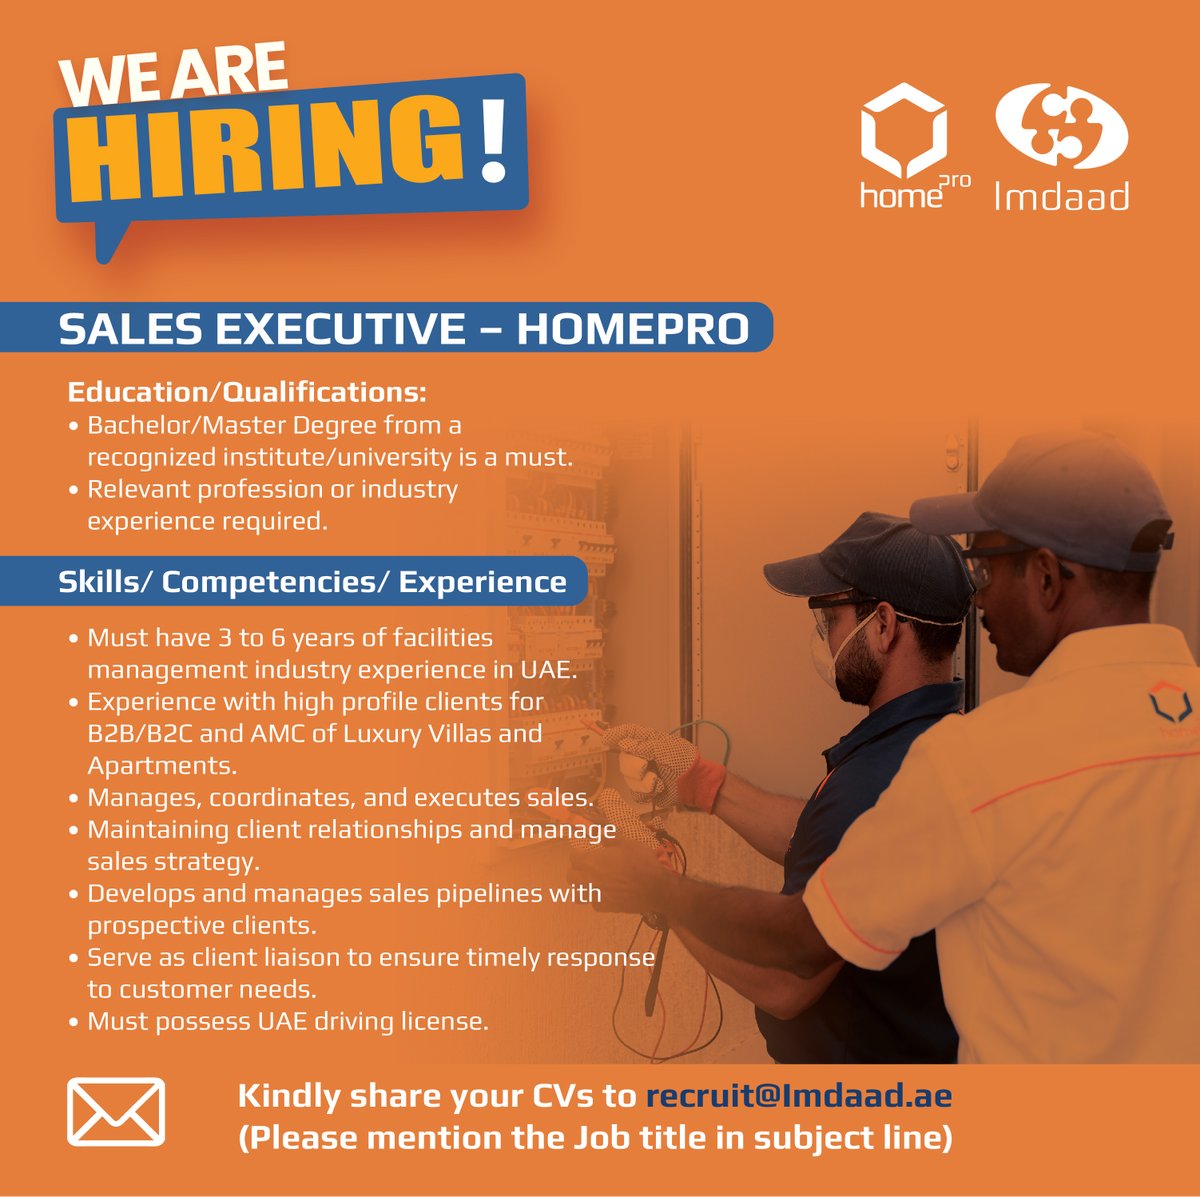 We’re #hiring!

Position:
Sales Executive- HomePro
Please mention the job title in the subject line.

#jobs #vacancies #softfm #facilitiesmanagement #ImdaadGroup #HomePro